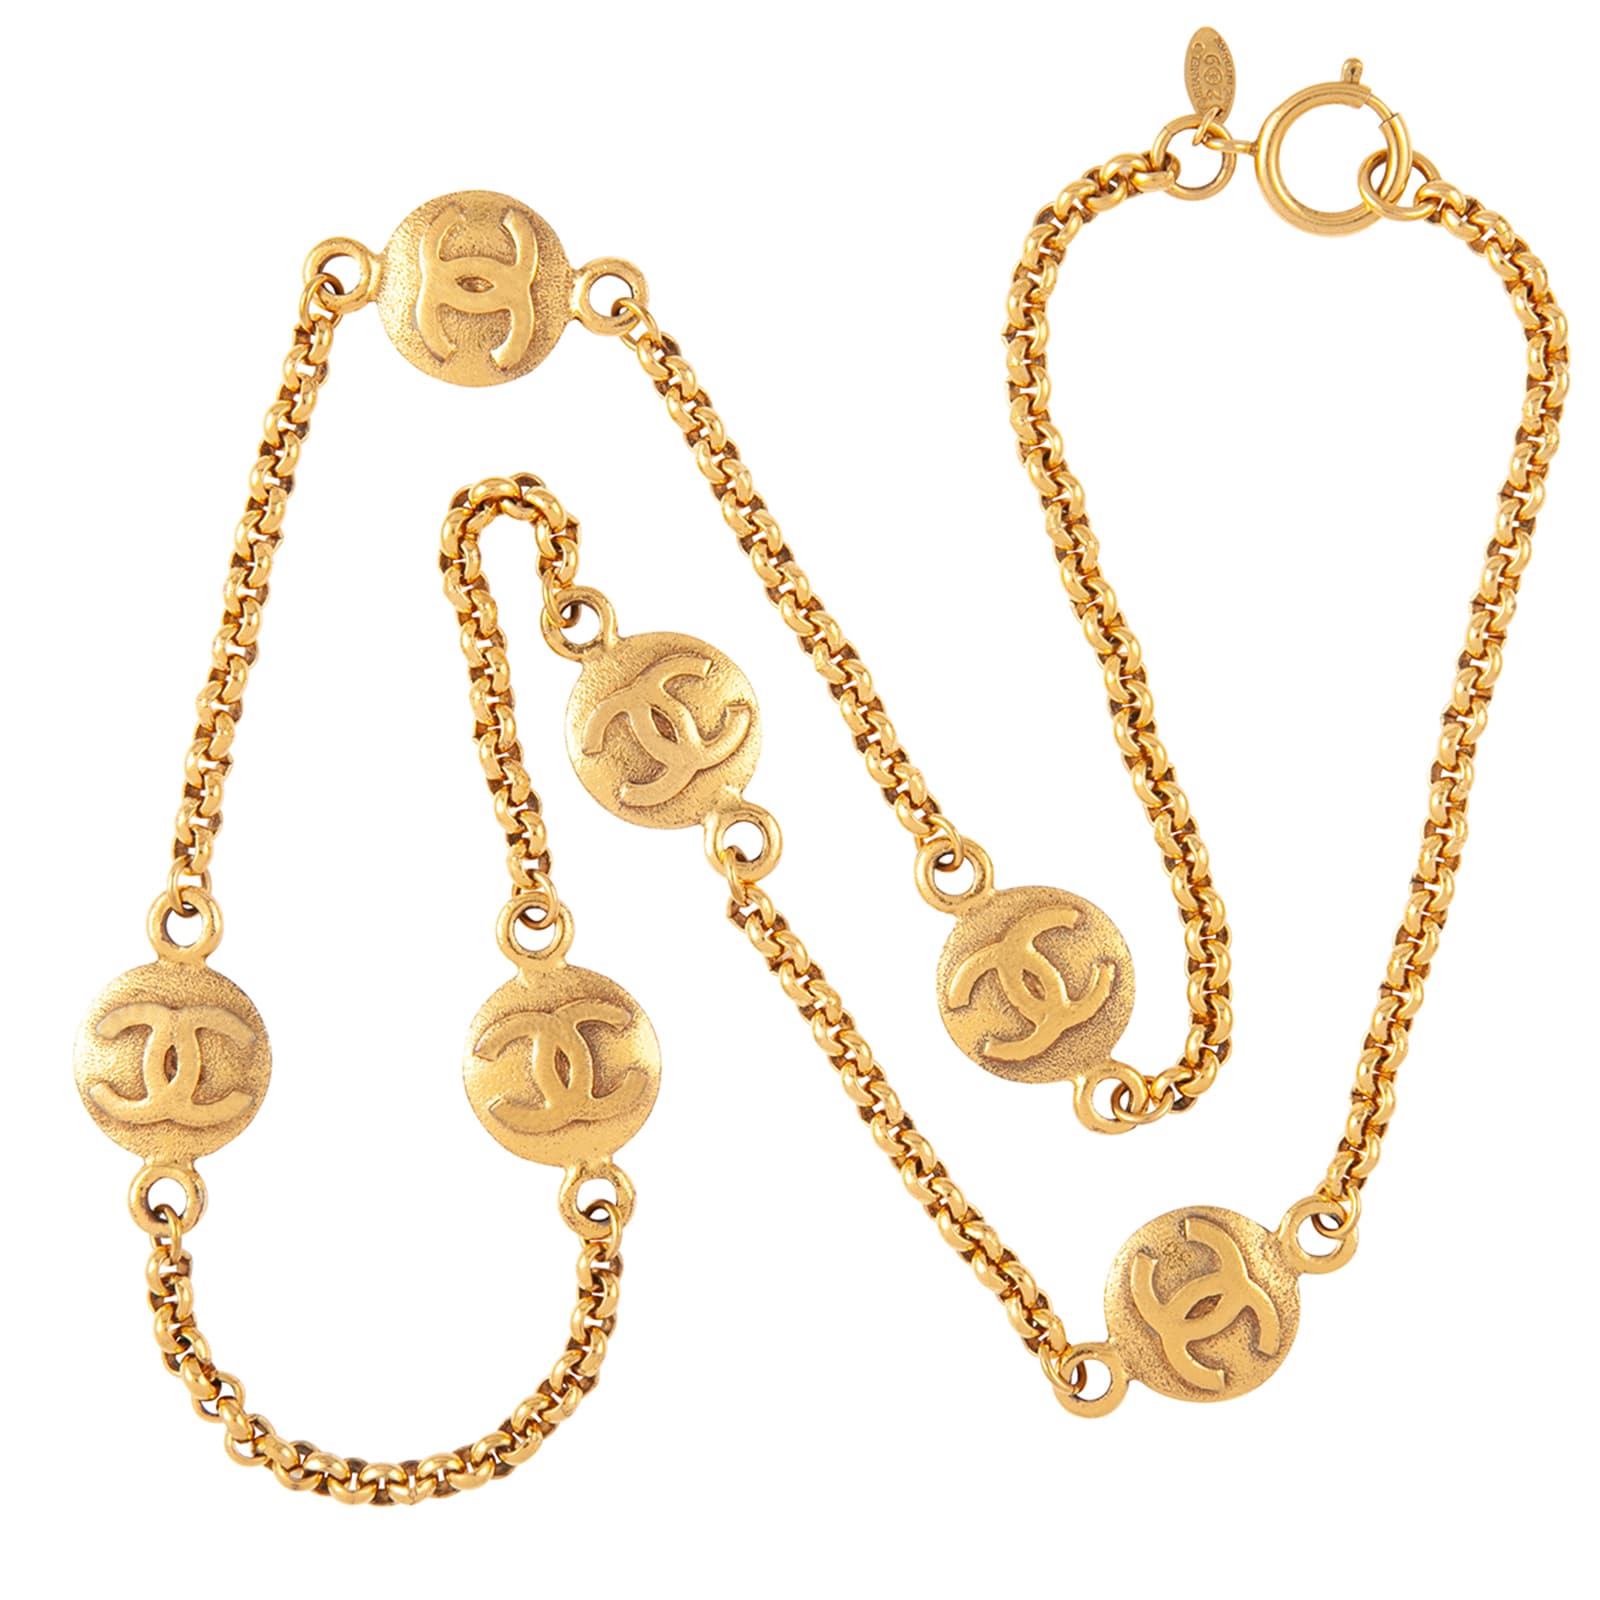 Vintage CHANEL Golden Chain Necklace With Round CC Mark Charm  Etsy